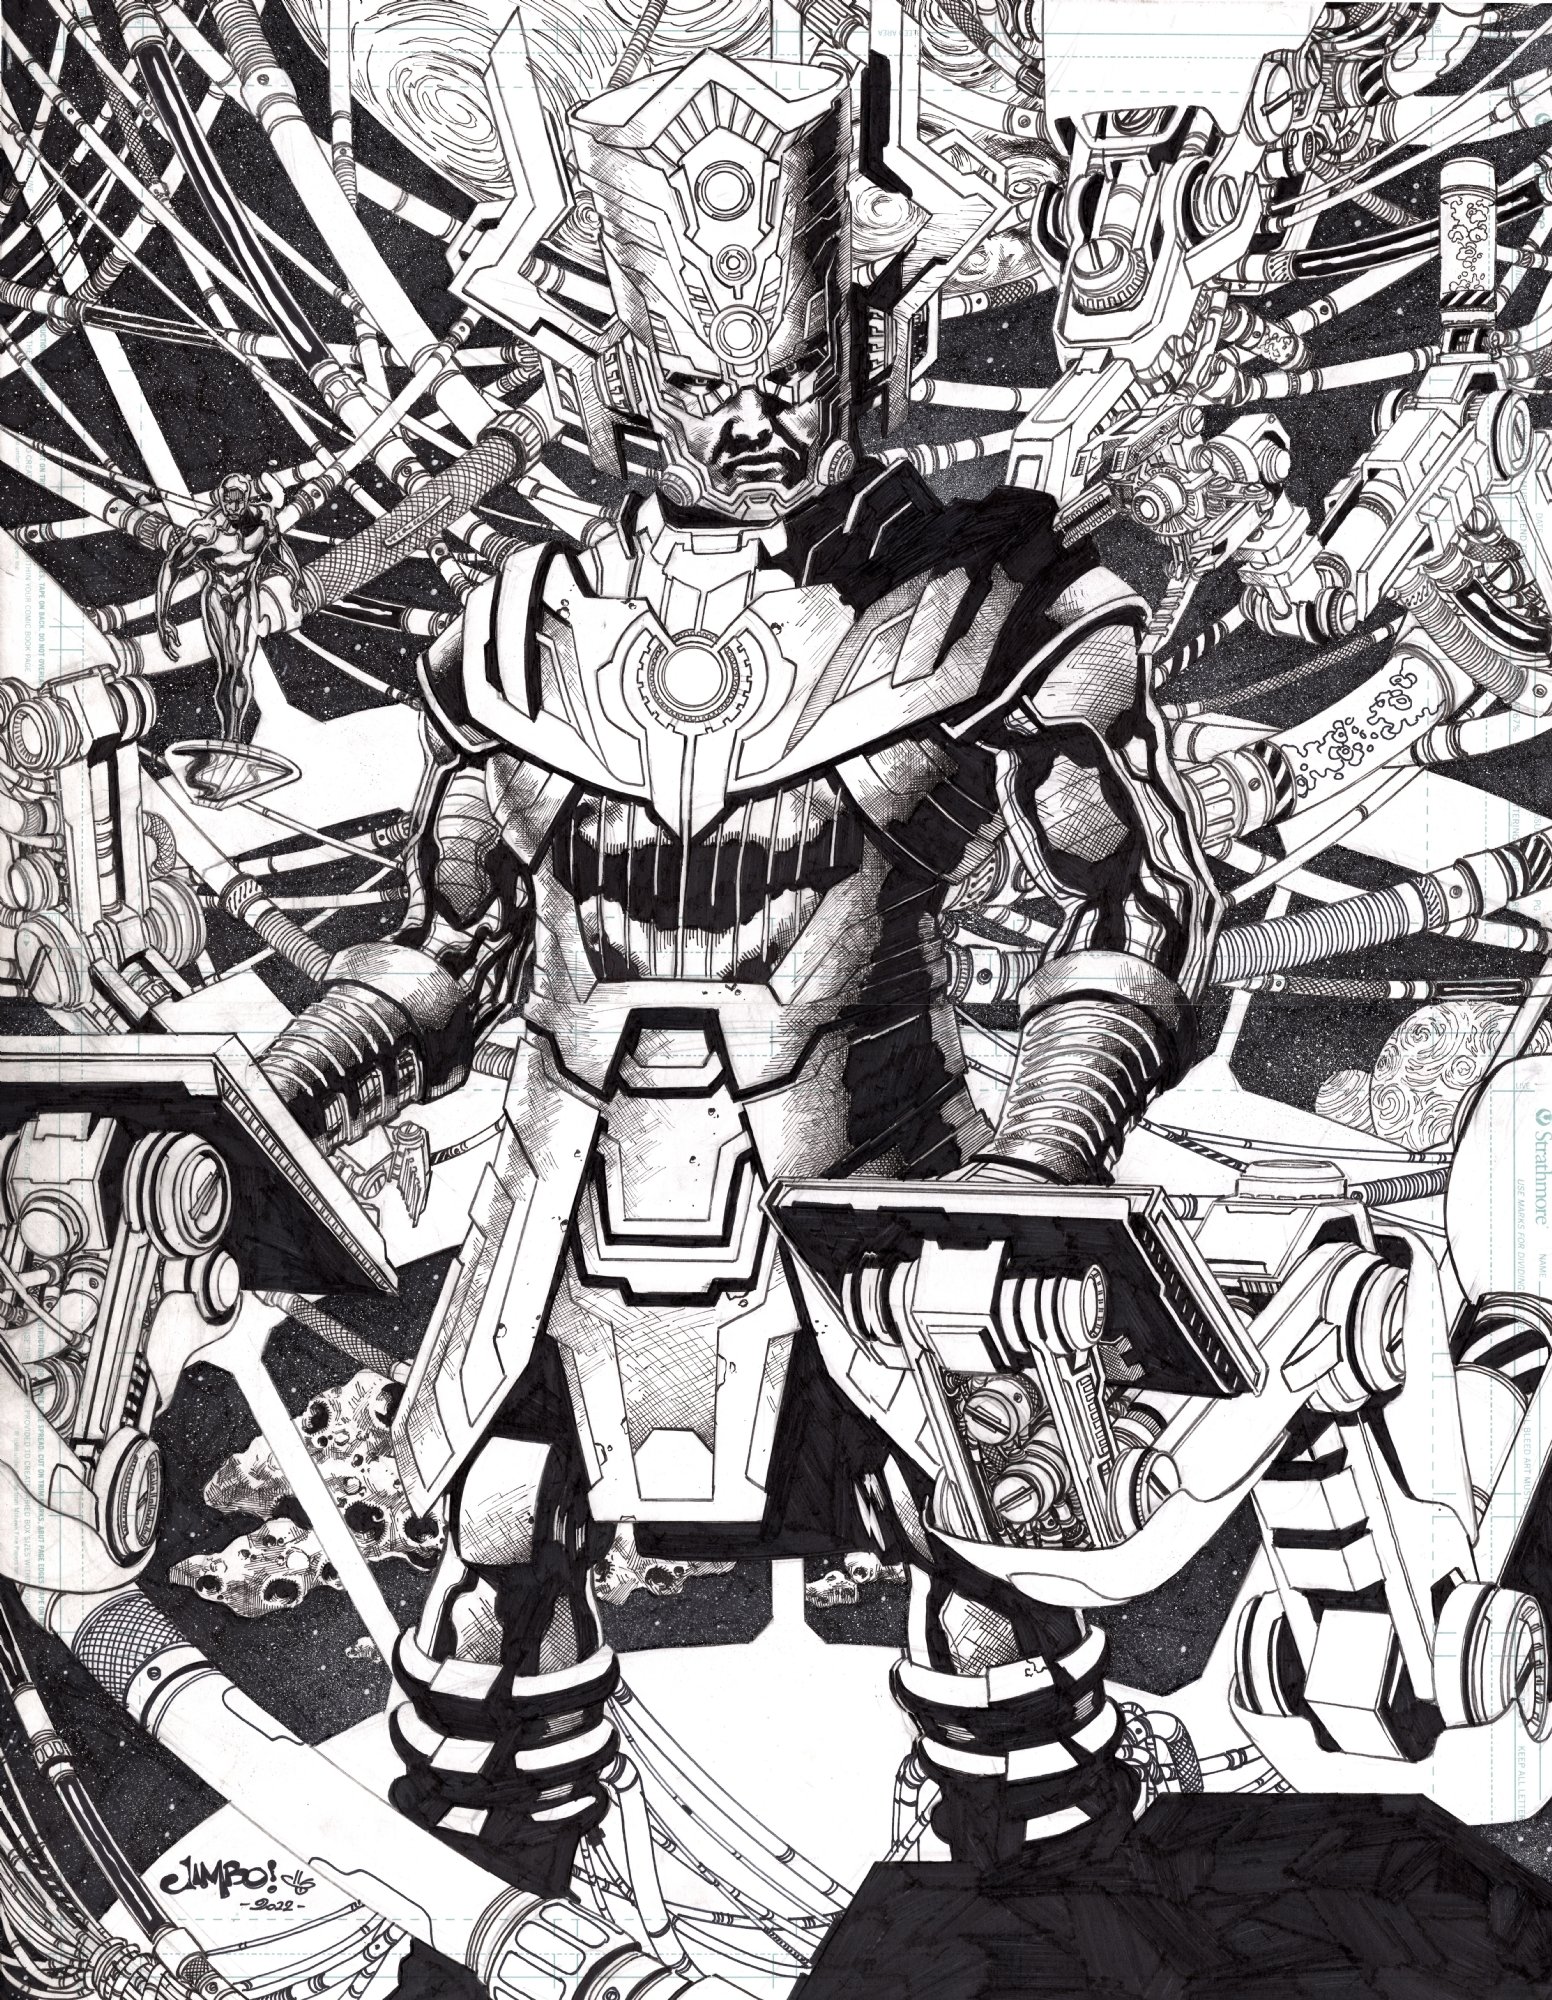 Fan Creates Awesome Concept Art of Galactus in the Marvel